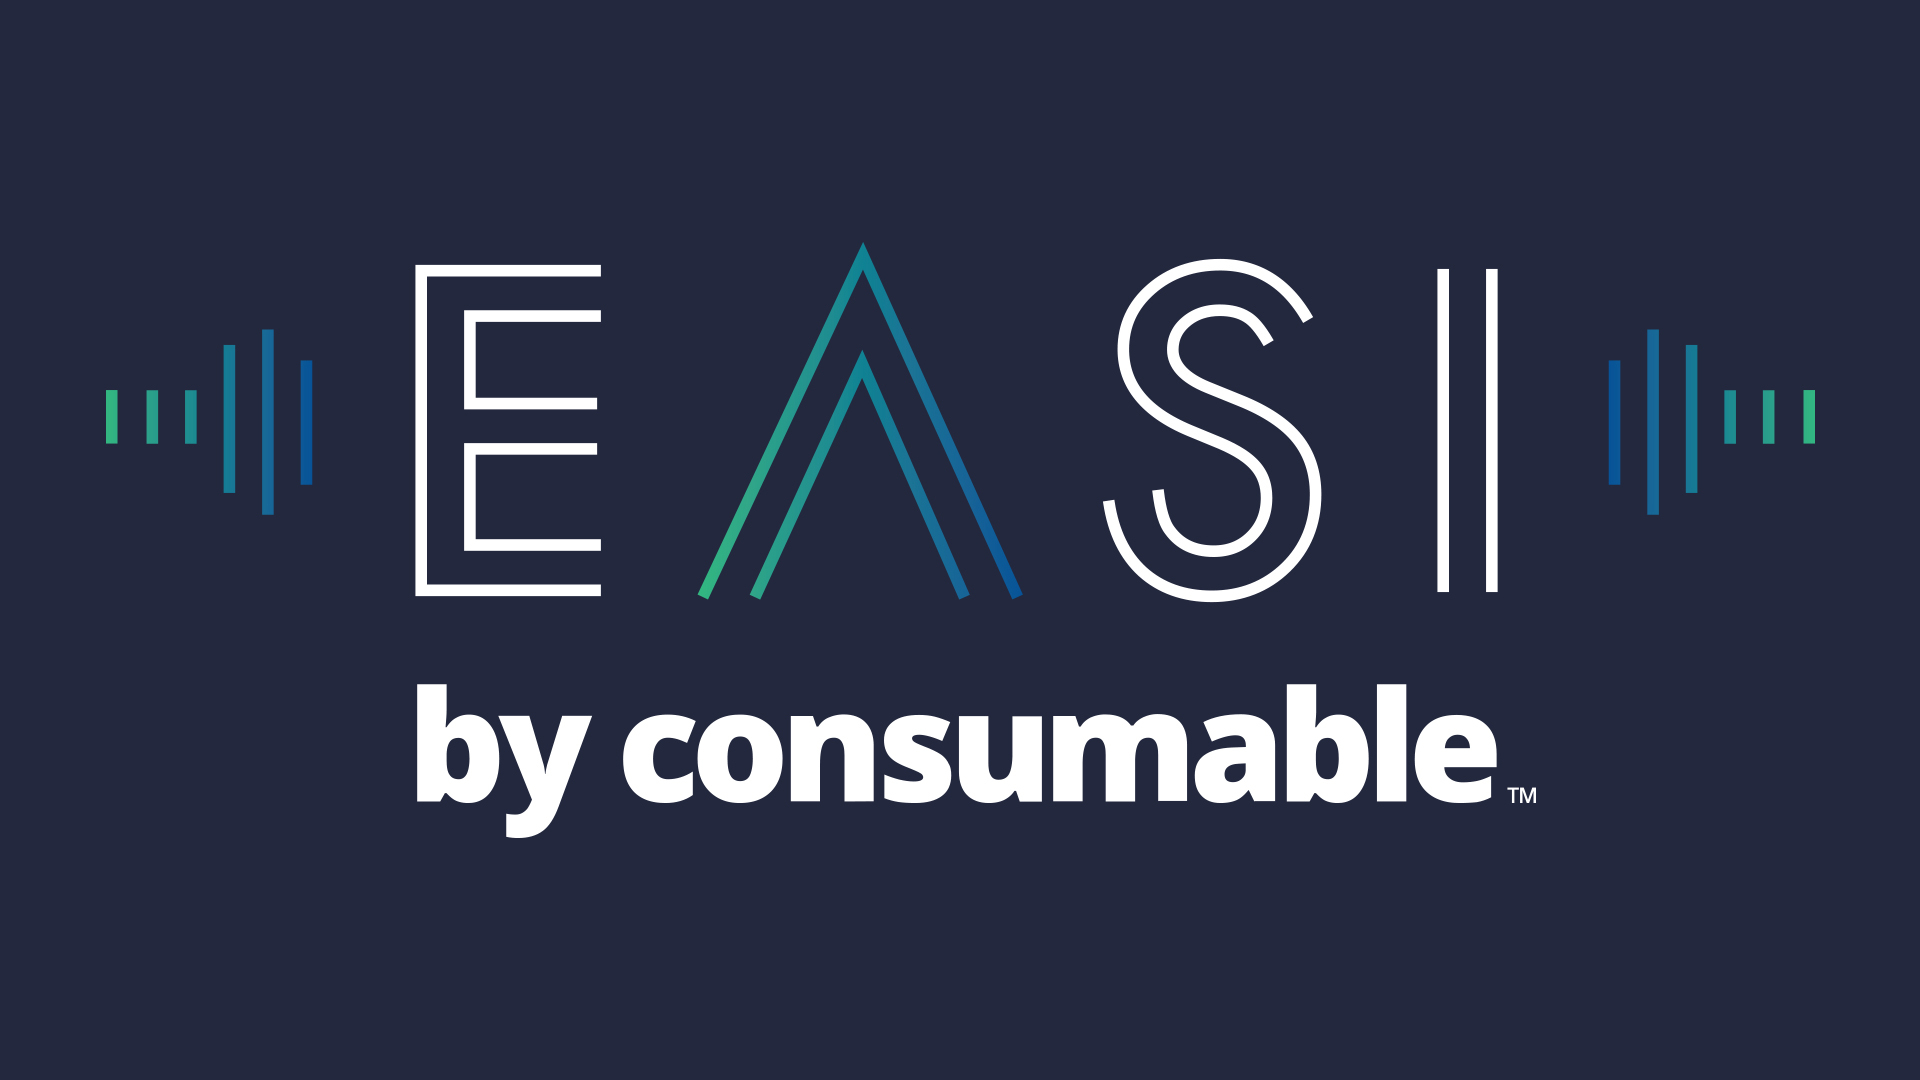 EASI by consumable